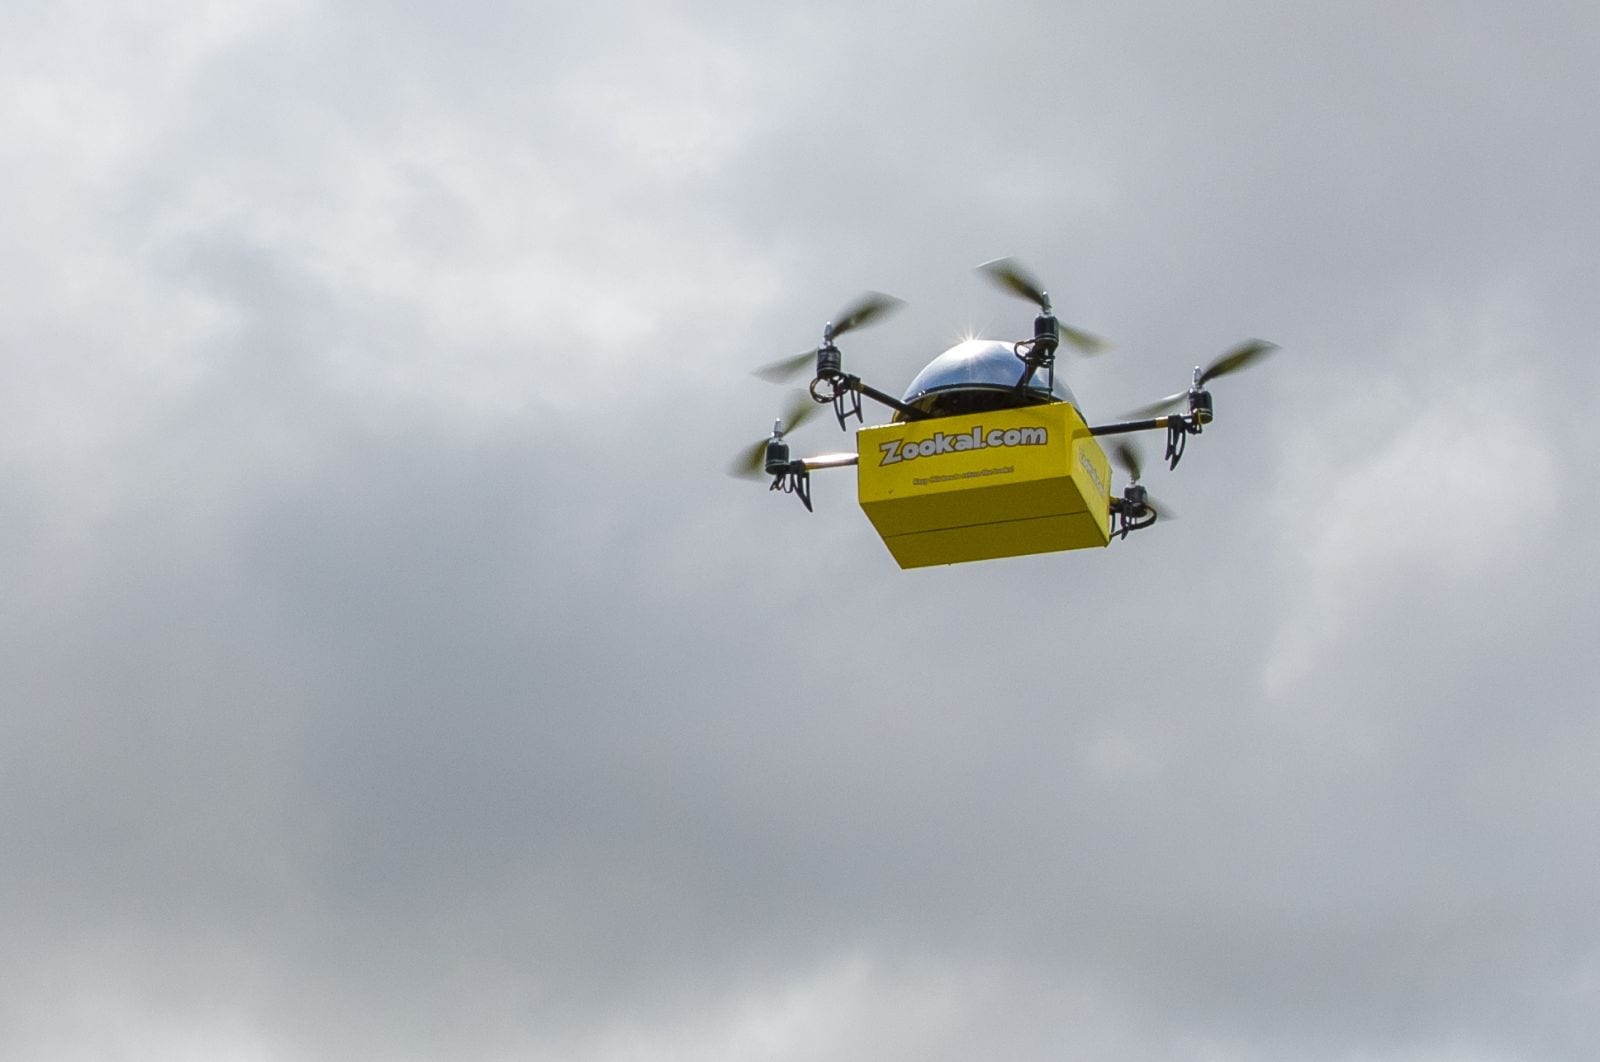 Doctors Without Borders Is Experimenting With Delivery Drones To Battle An Epidemic